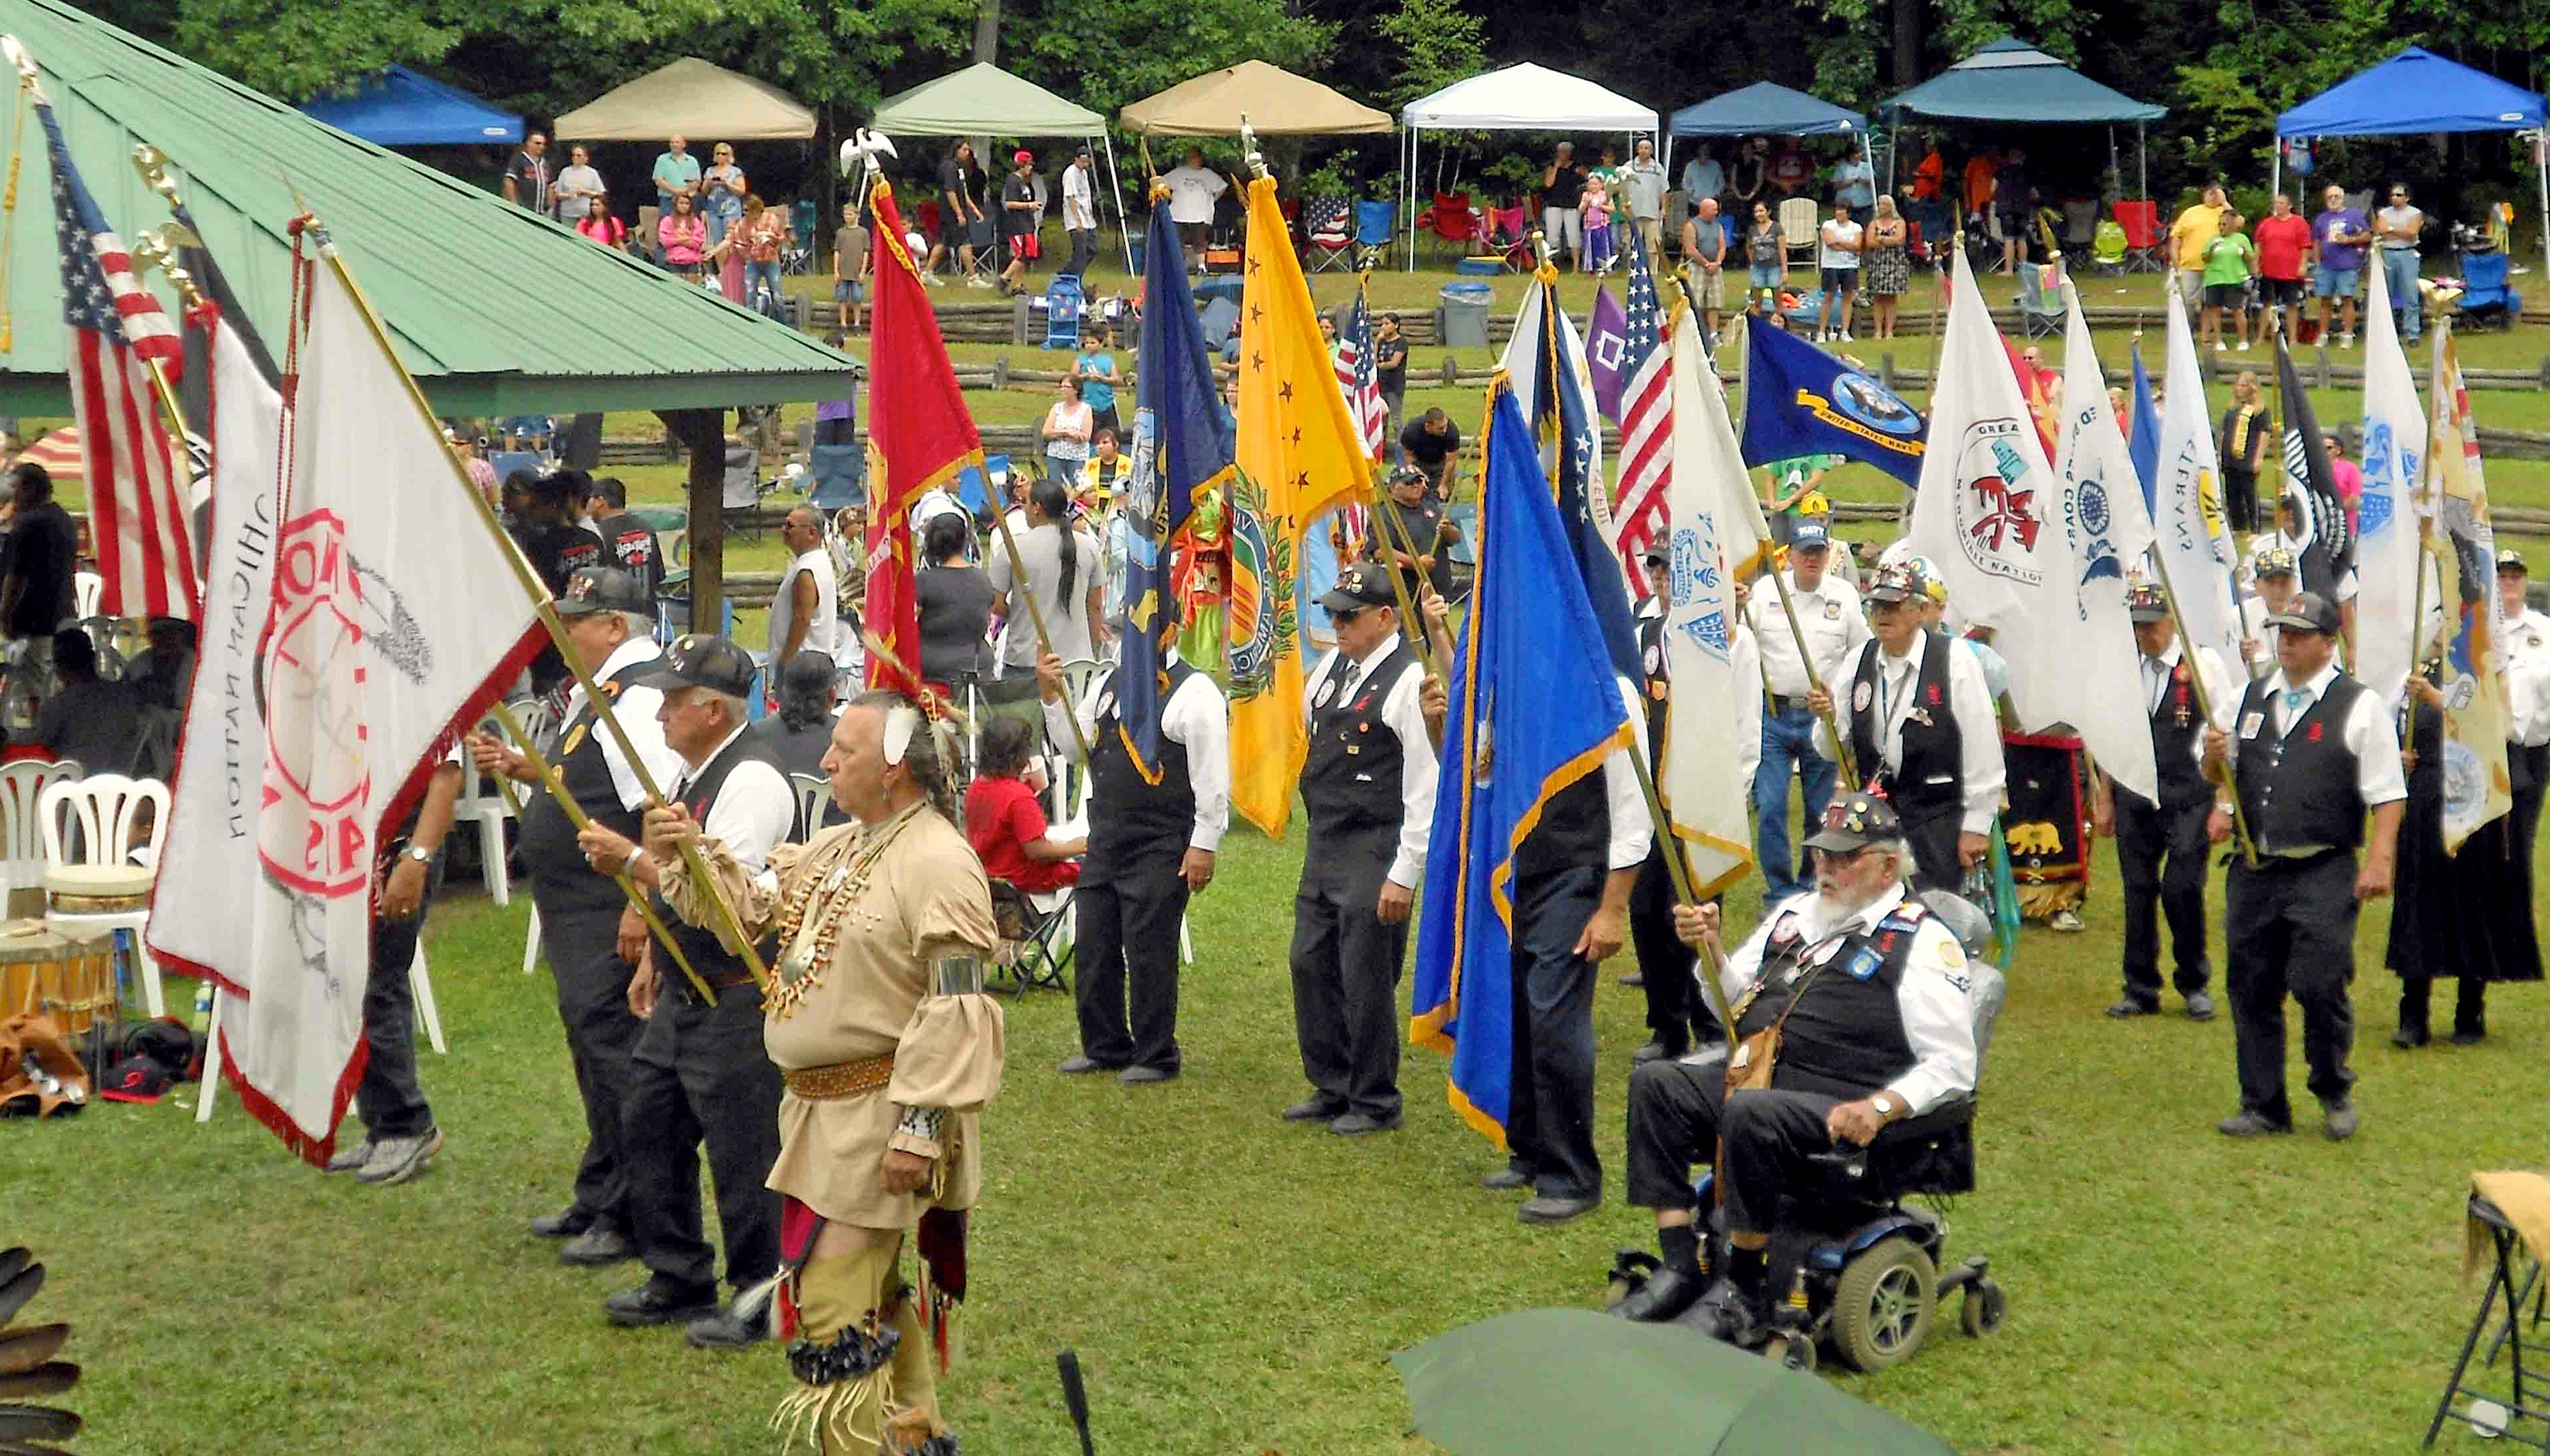 Mohican Nation elders outdoors marching with flags at a powwow.